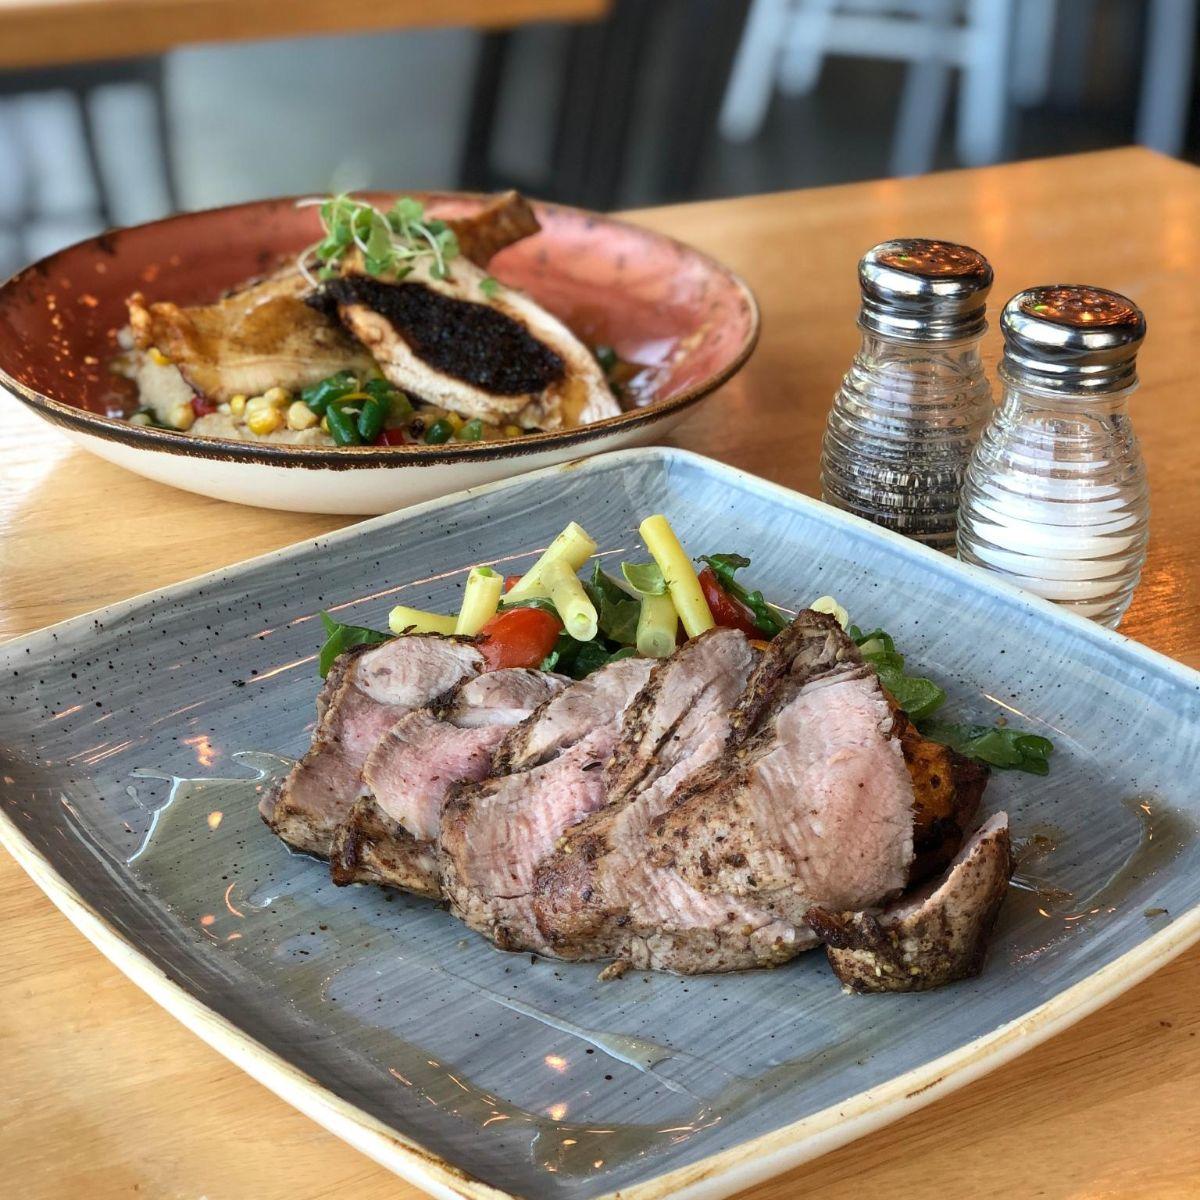 You made it to the long weekend! Whether you're out on the town or hiding from the chaos of moving day, we hope you make it a great one. ✨ Pictured: za'atar rubbed pork tenderloin from our #DineOutBoston menu (ends today!)